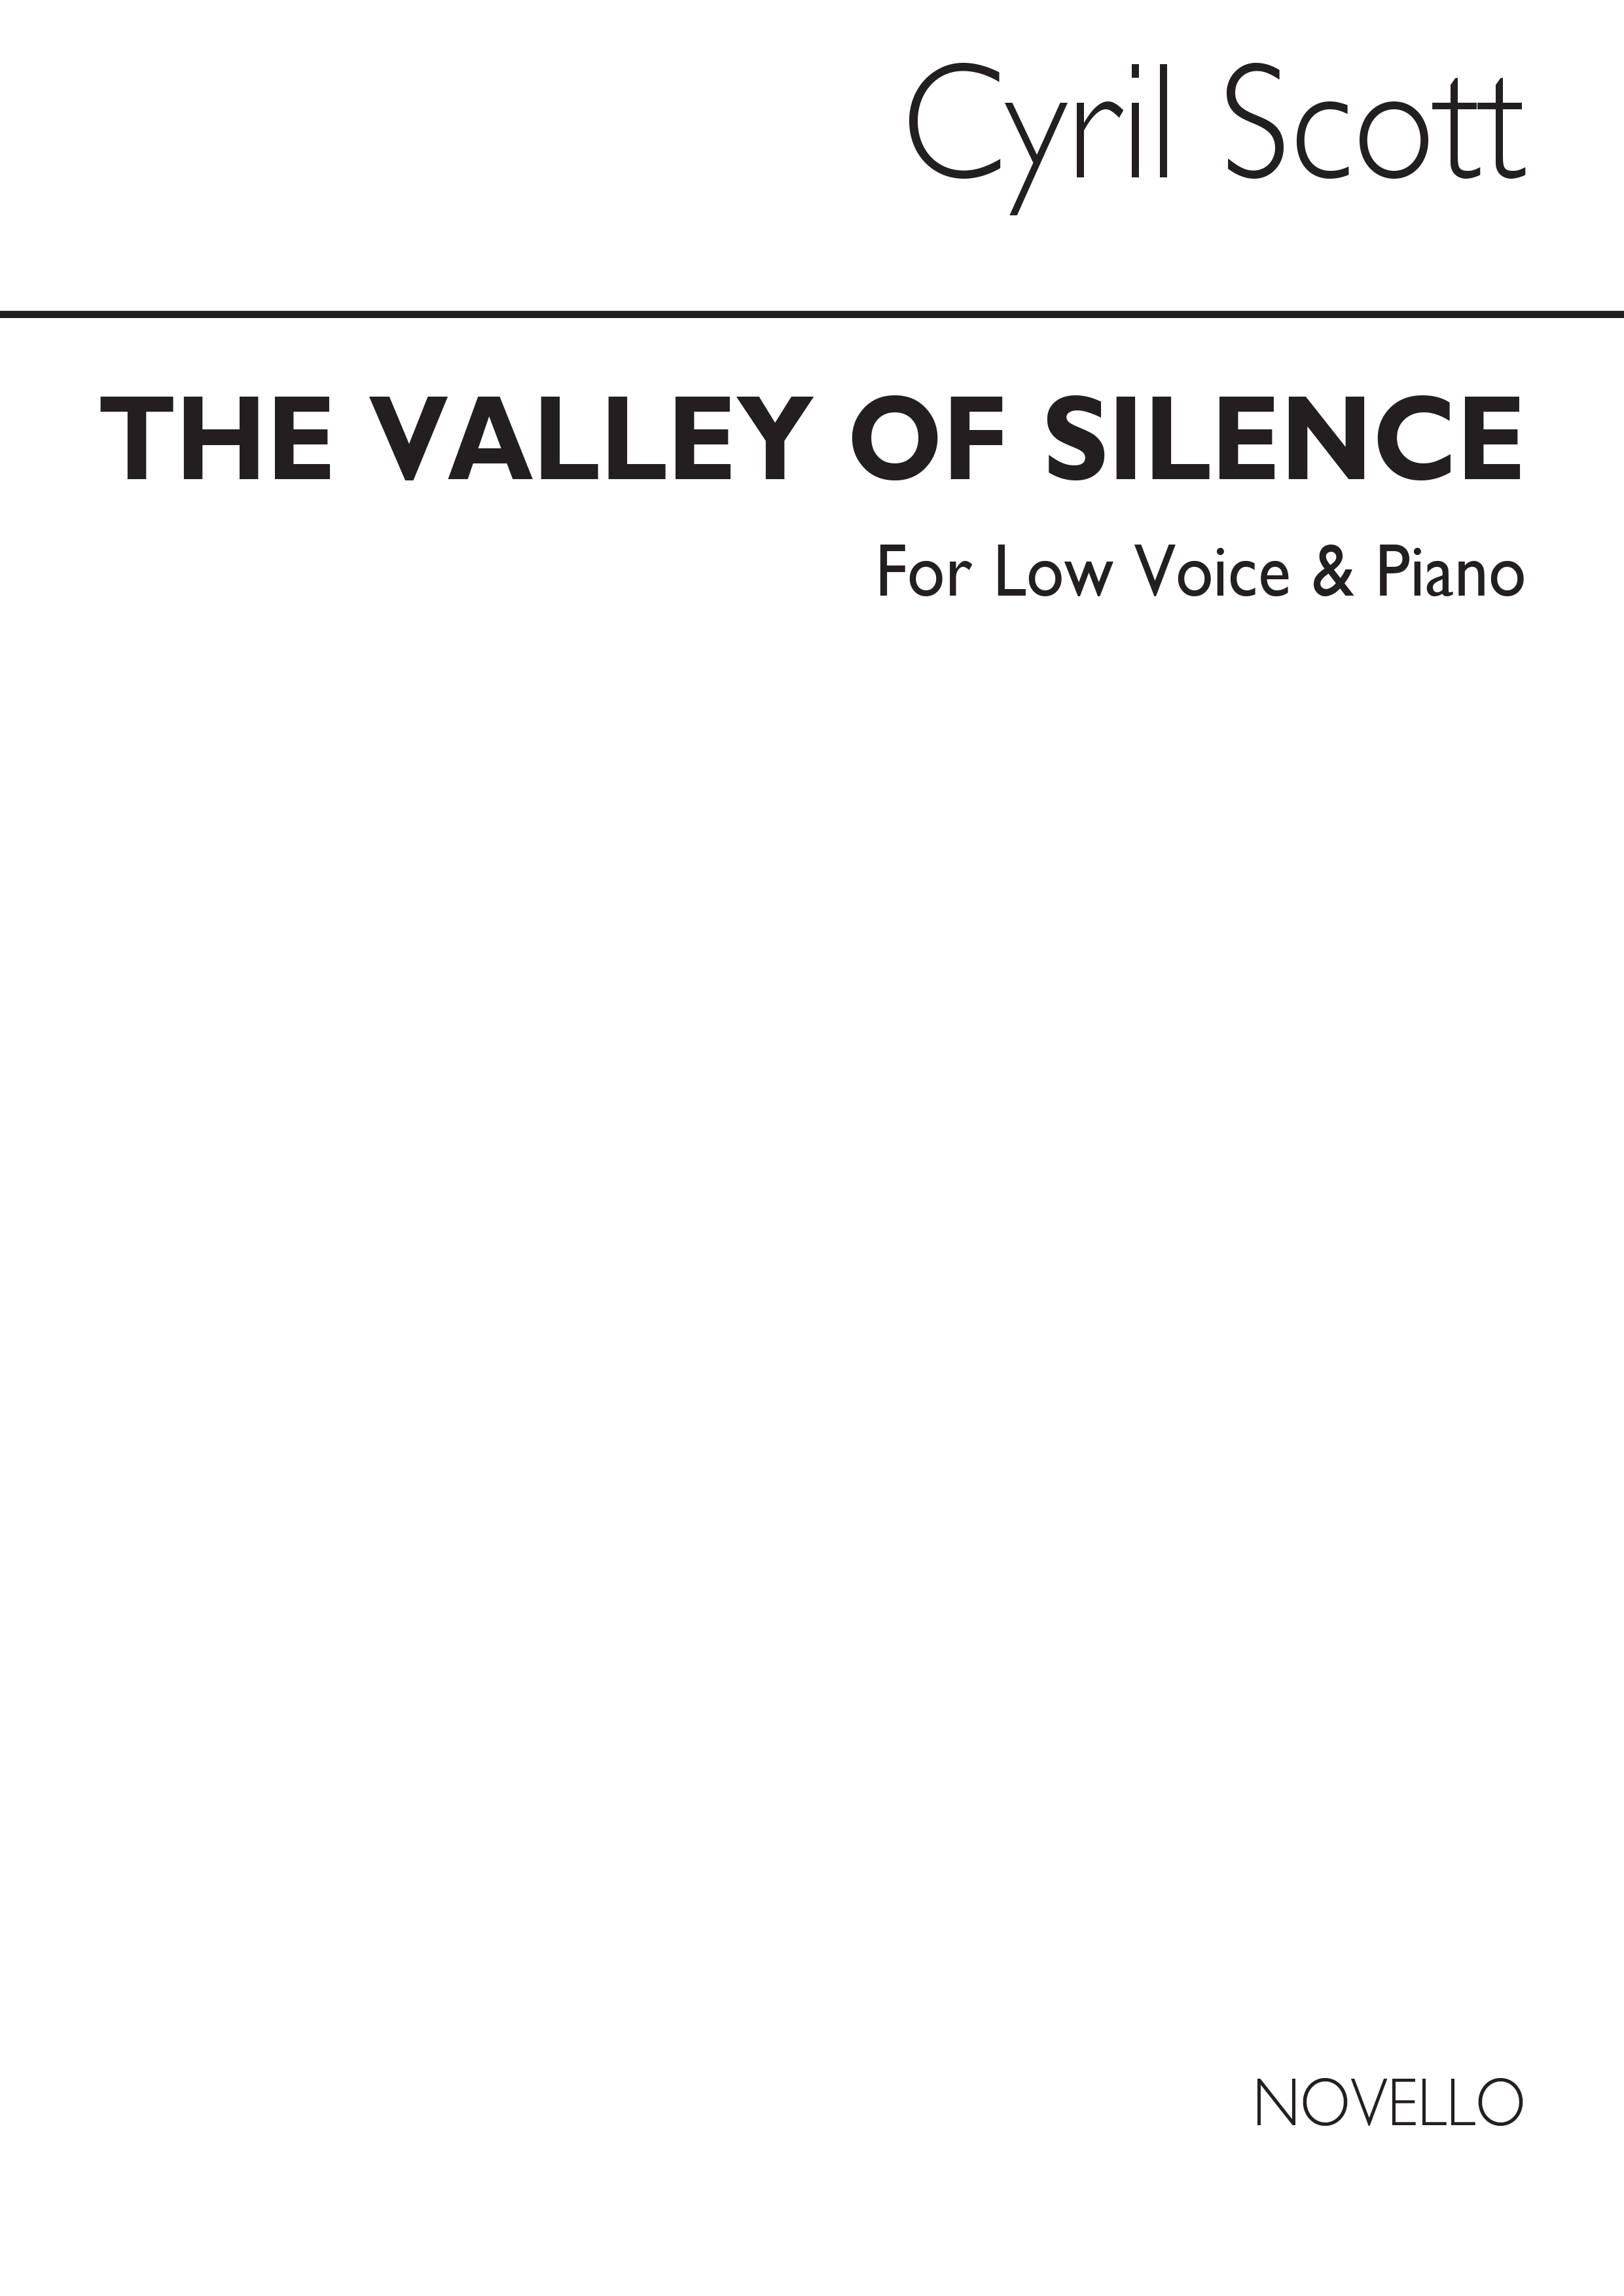 Cyril Scott: The Valley Of Silence Op72 No.4 (Key-c): Low Voice: Vocal Work